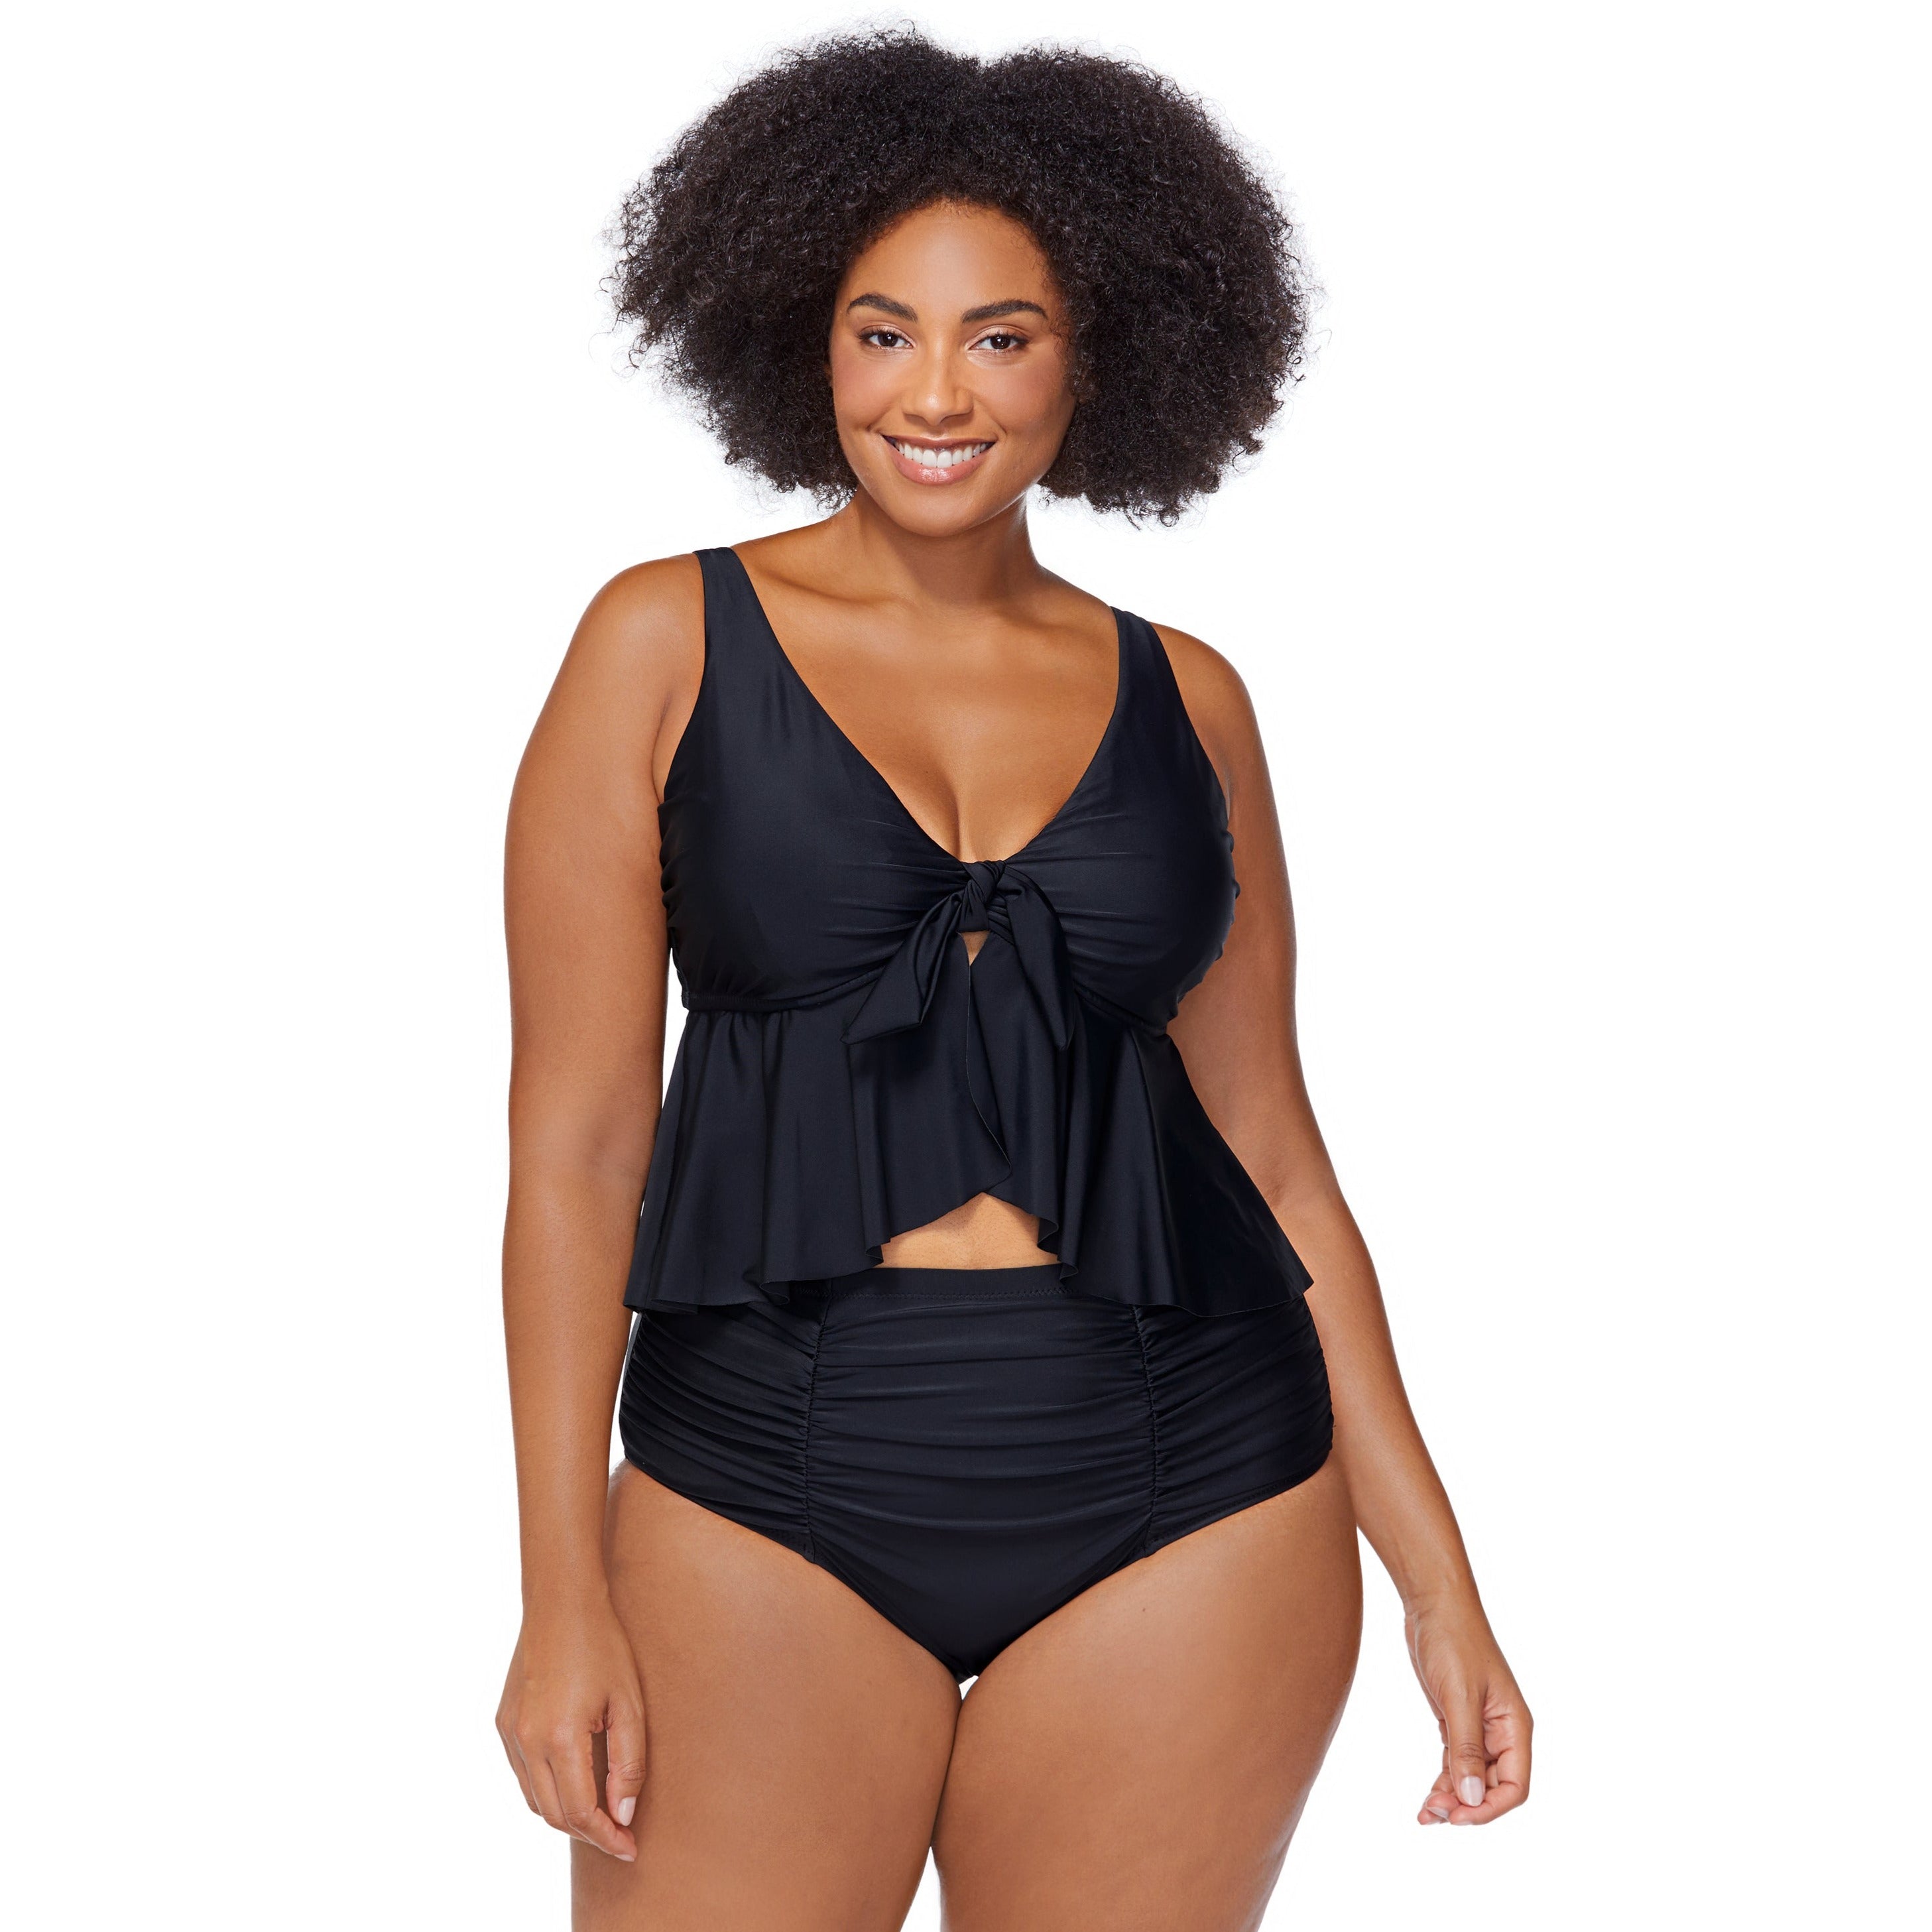  Swim with style and flirty confidence in this plus-size tankini set! With an underwire support and knot detail at the decolletage, you'll look and feel lifted and supported. Flattering frills center the bust and rose gold hardware add a touch of glam. High-waisted bottoms provide the perfect coverage for a look that'll give you the ultimate beach-babe vibes.     J840047 / 840061R + 